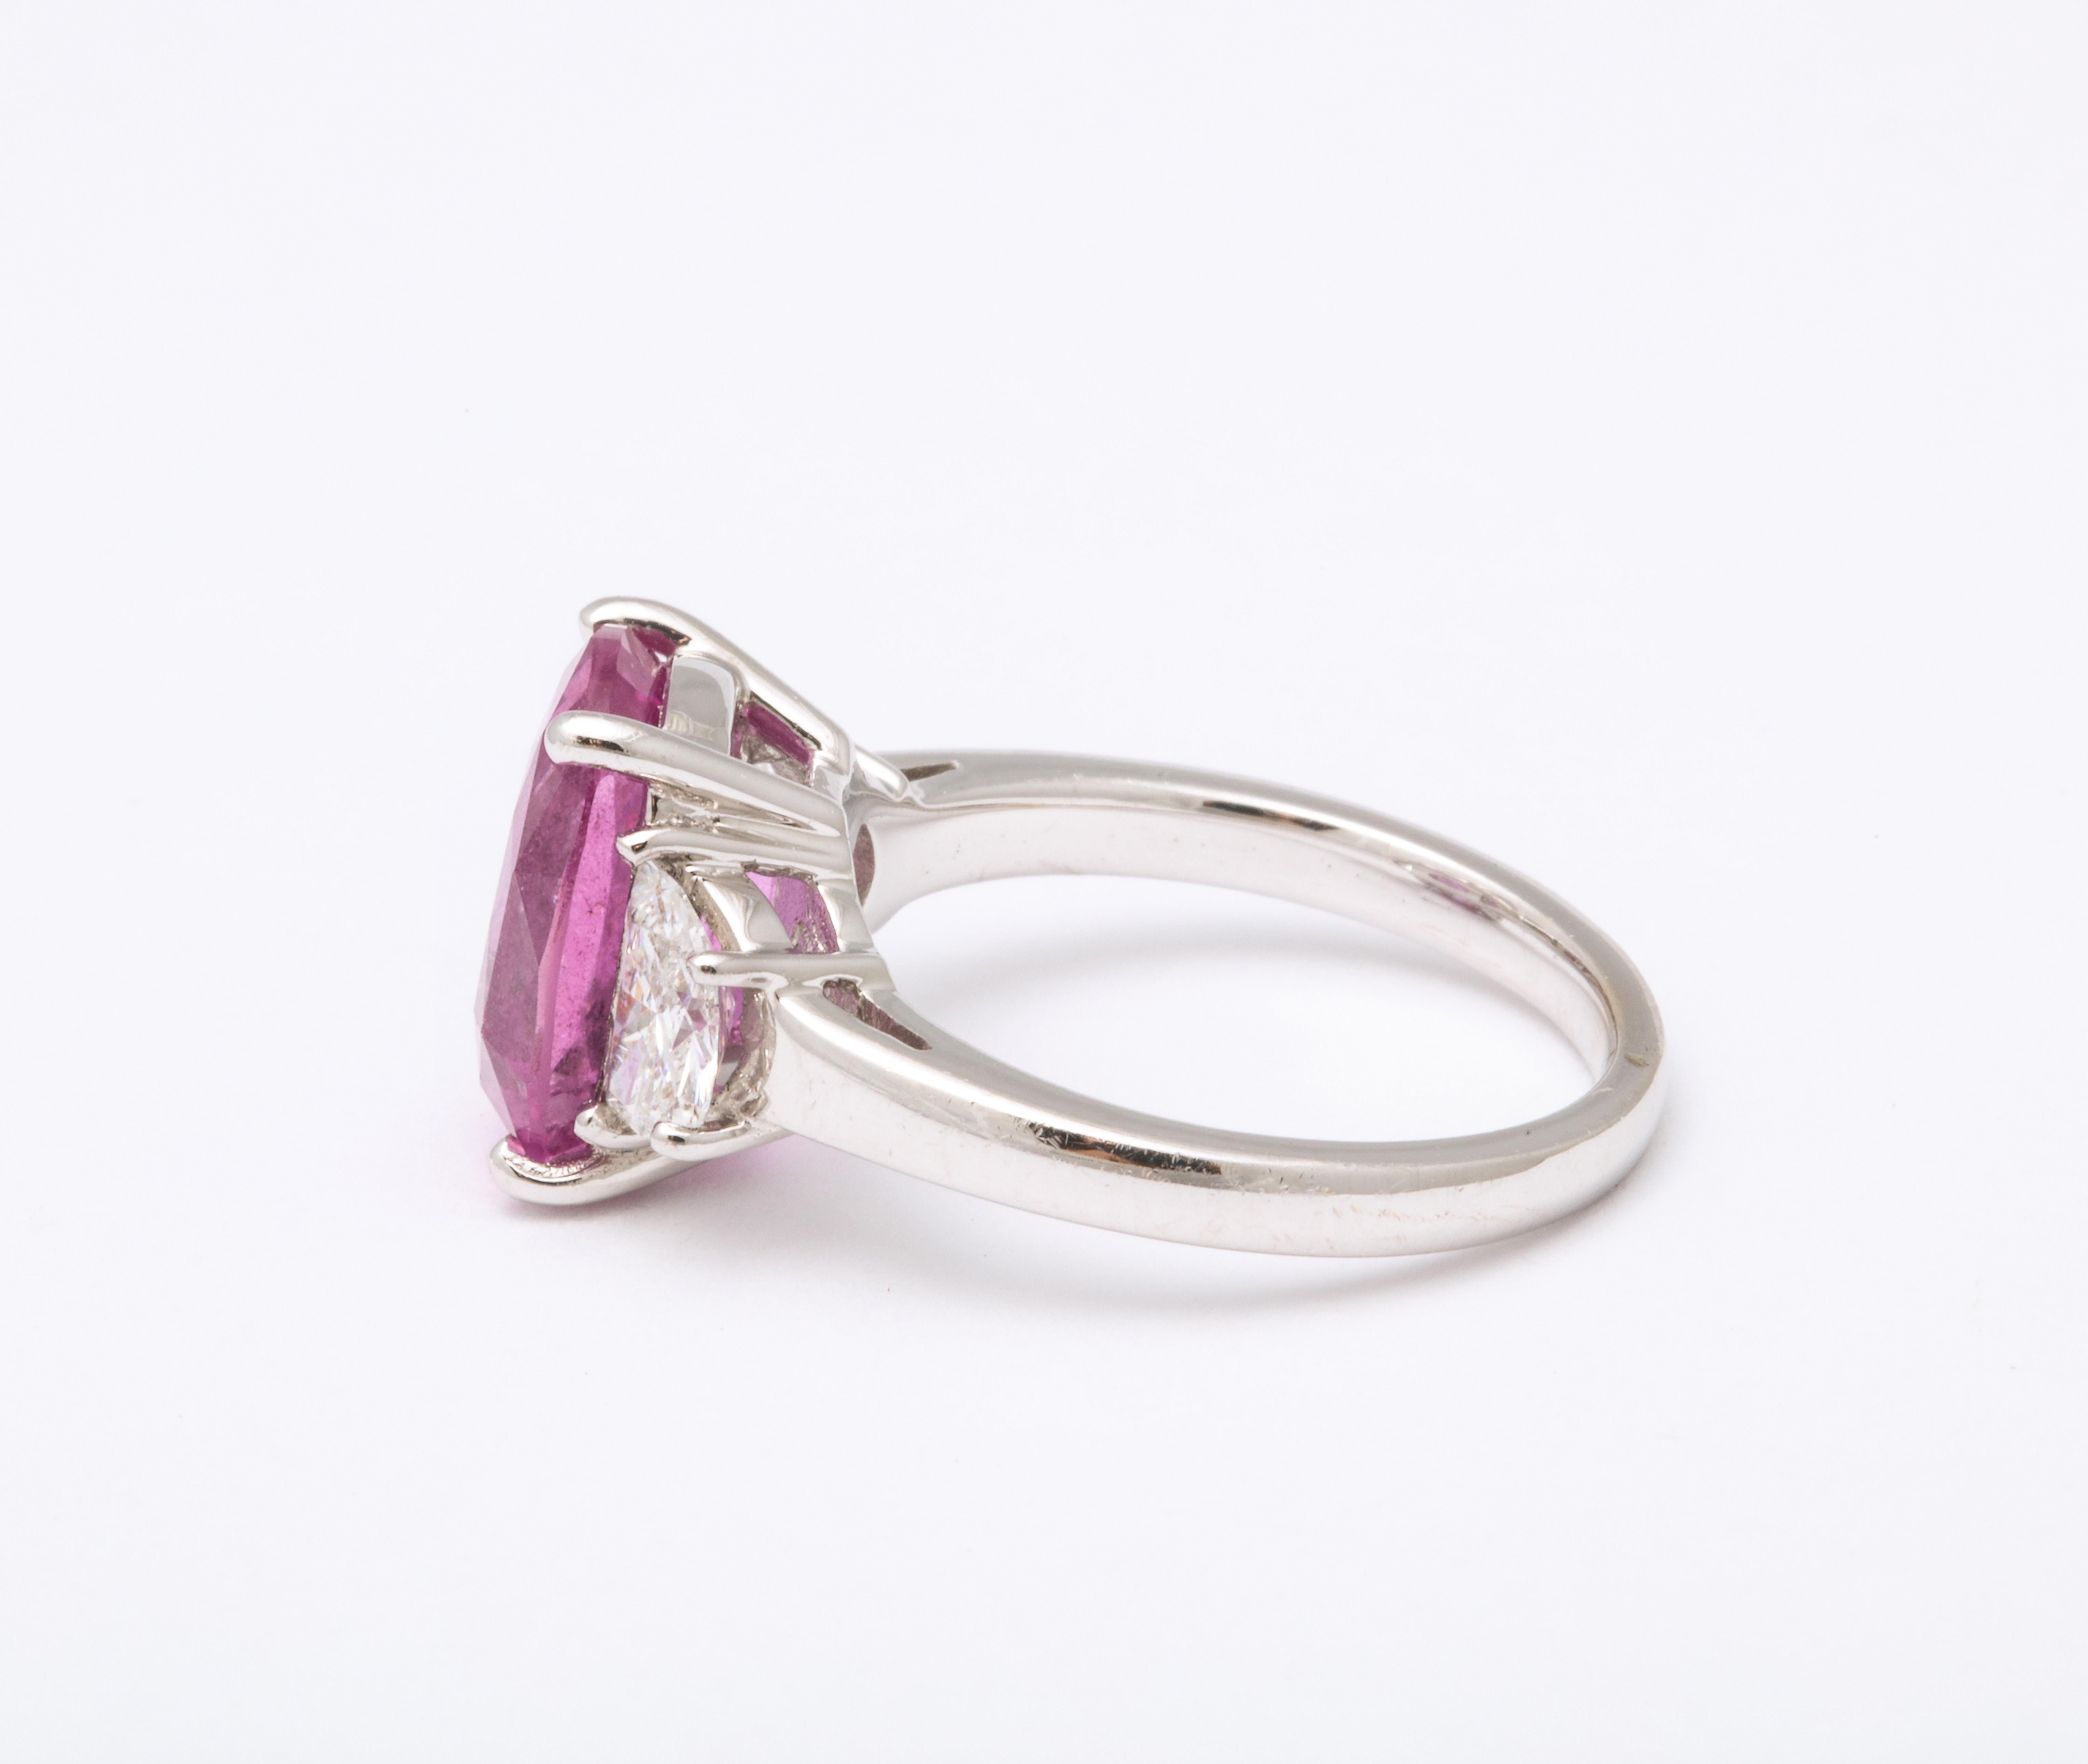 
Certified Vivid Pink Cushion Cut 5.06 carat sapphire and diamond ring. 

.75 carats of colorless white half moon cut diamonds

set in 18k white gold.

Certified by C. Dunaigre Consulting: the sapphire is rated VERY GOOD and VIVID PINK.

Currently a